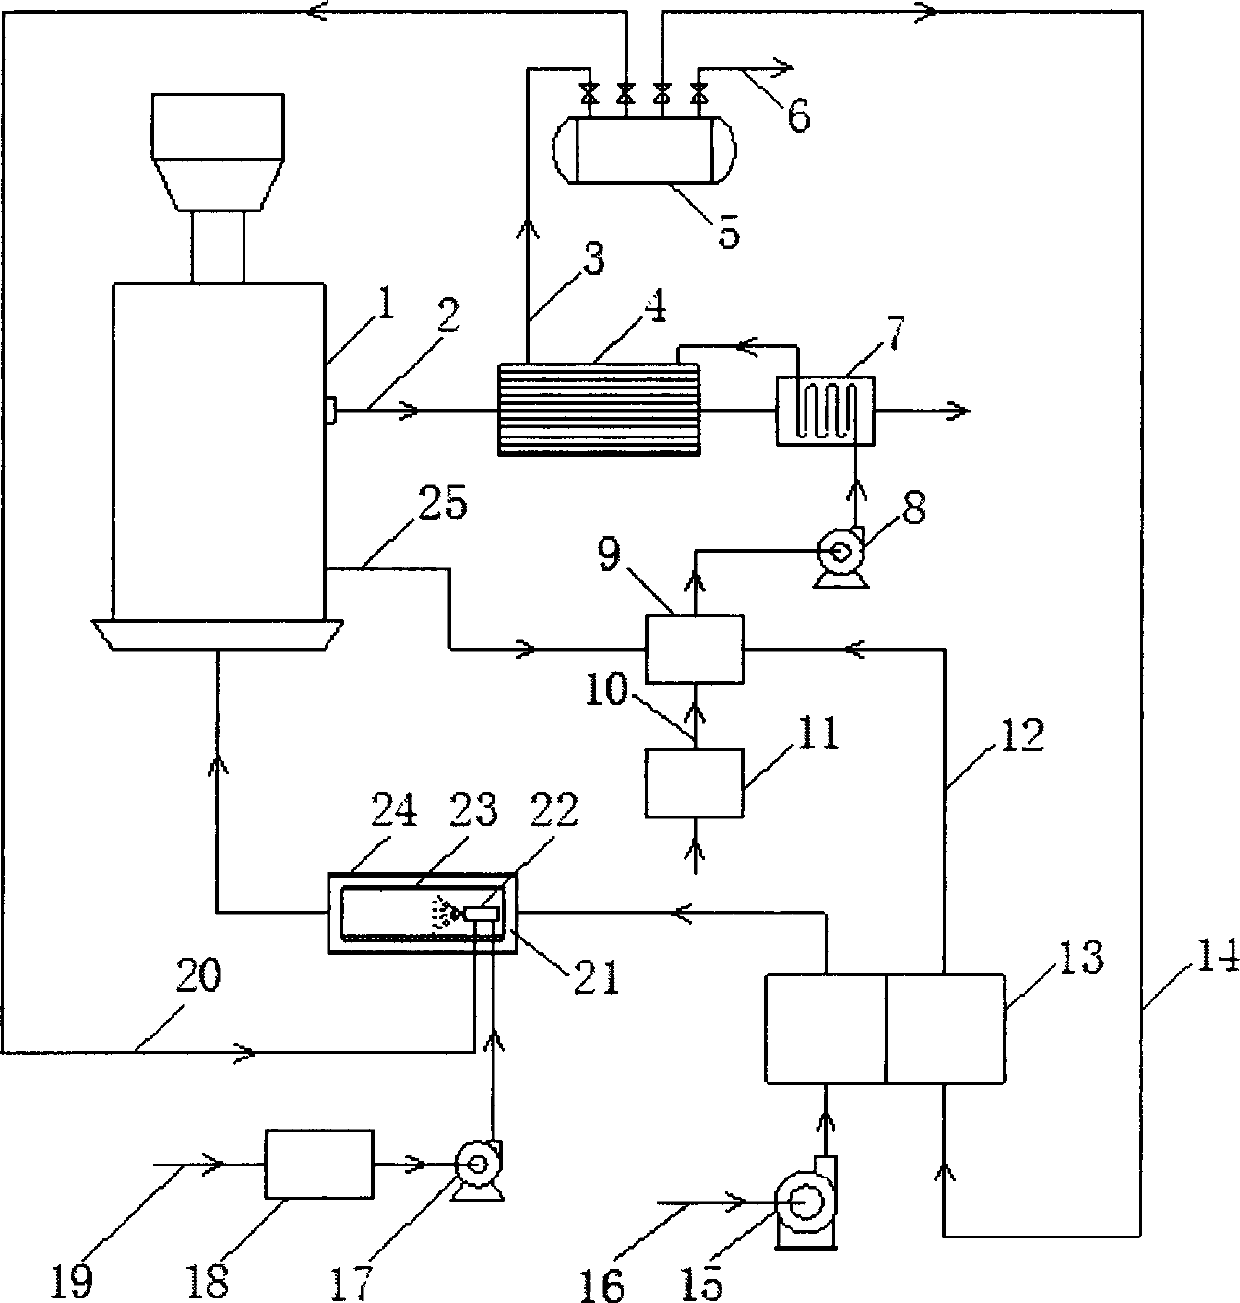 Treatment method for phenolic water produced by gas producer